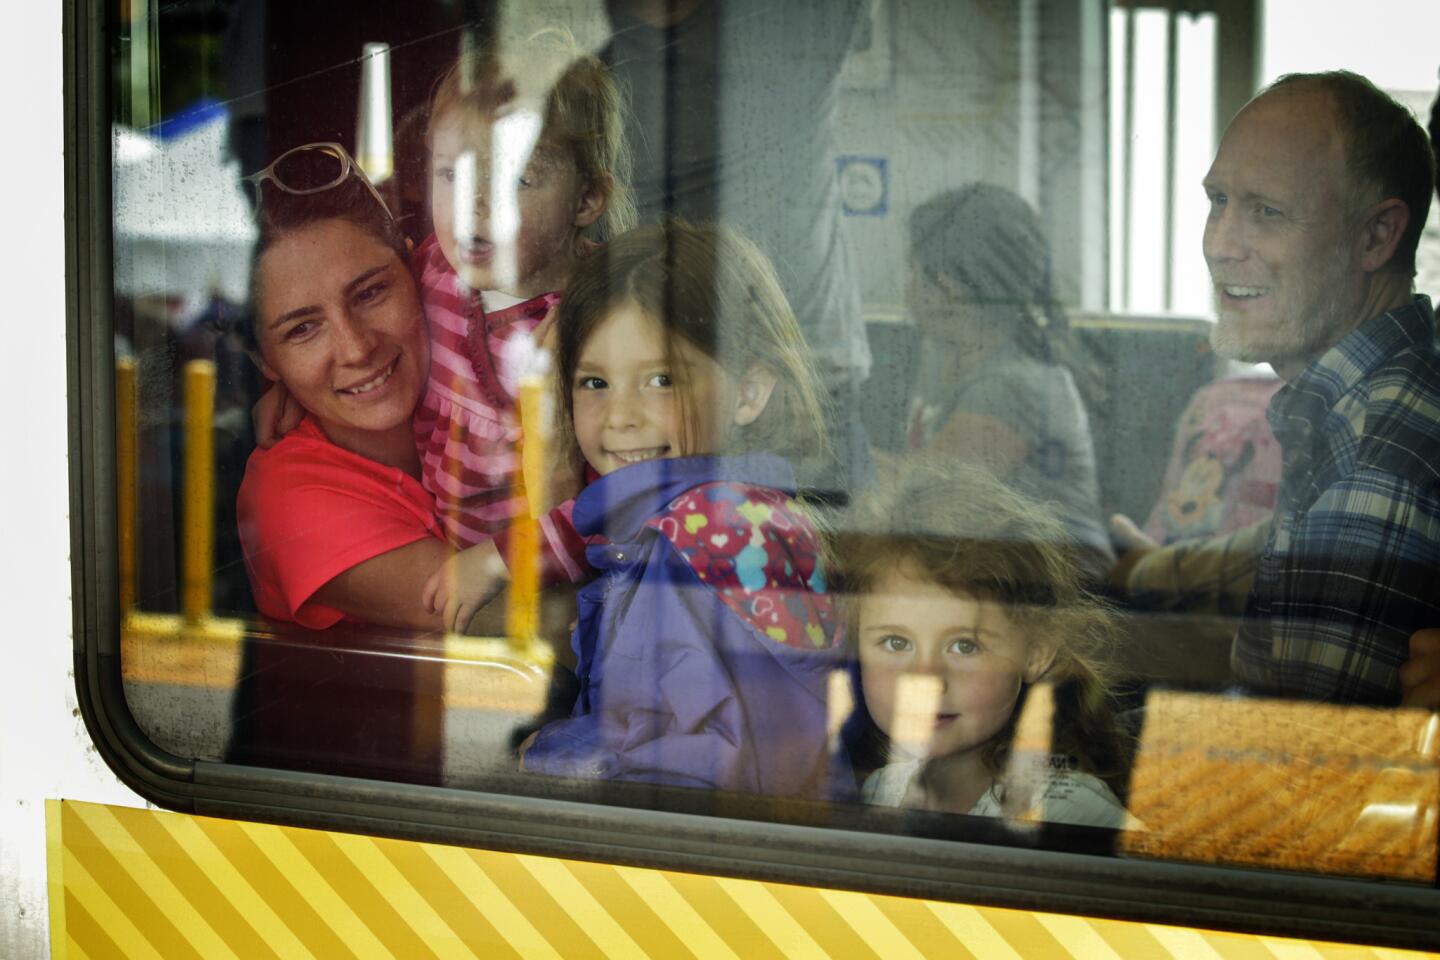 A family enjoys a ride on the Metro Gold Line train on the opening day of service on the $1-billion, 11.5-mile extension through the Foothills. The line will transform the lives and commutes of San Gabriel Valley residents, officials say.